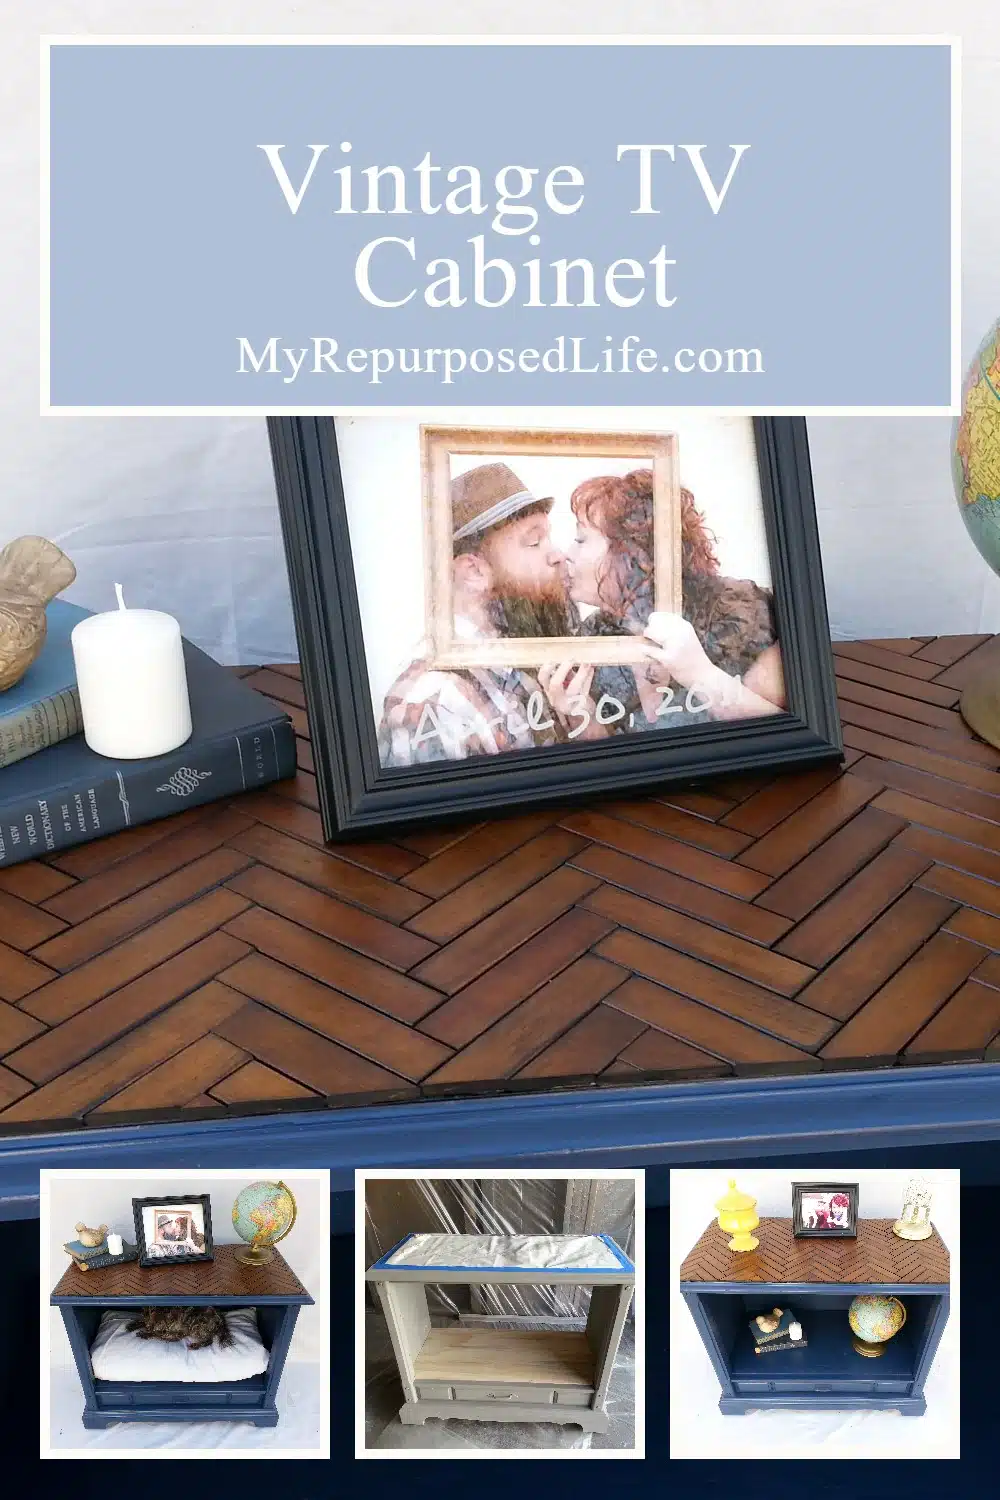 How to do a chevron table top pattern with repurposed shutter slats on an old console tv stand. Some may call it a herringbone table top. Update something you already have! #MyRepurposedLife #repurposed #tvstand #console #tv #cabinet #upcycle #diy #chevron #shutter #slats via @repurposedlife